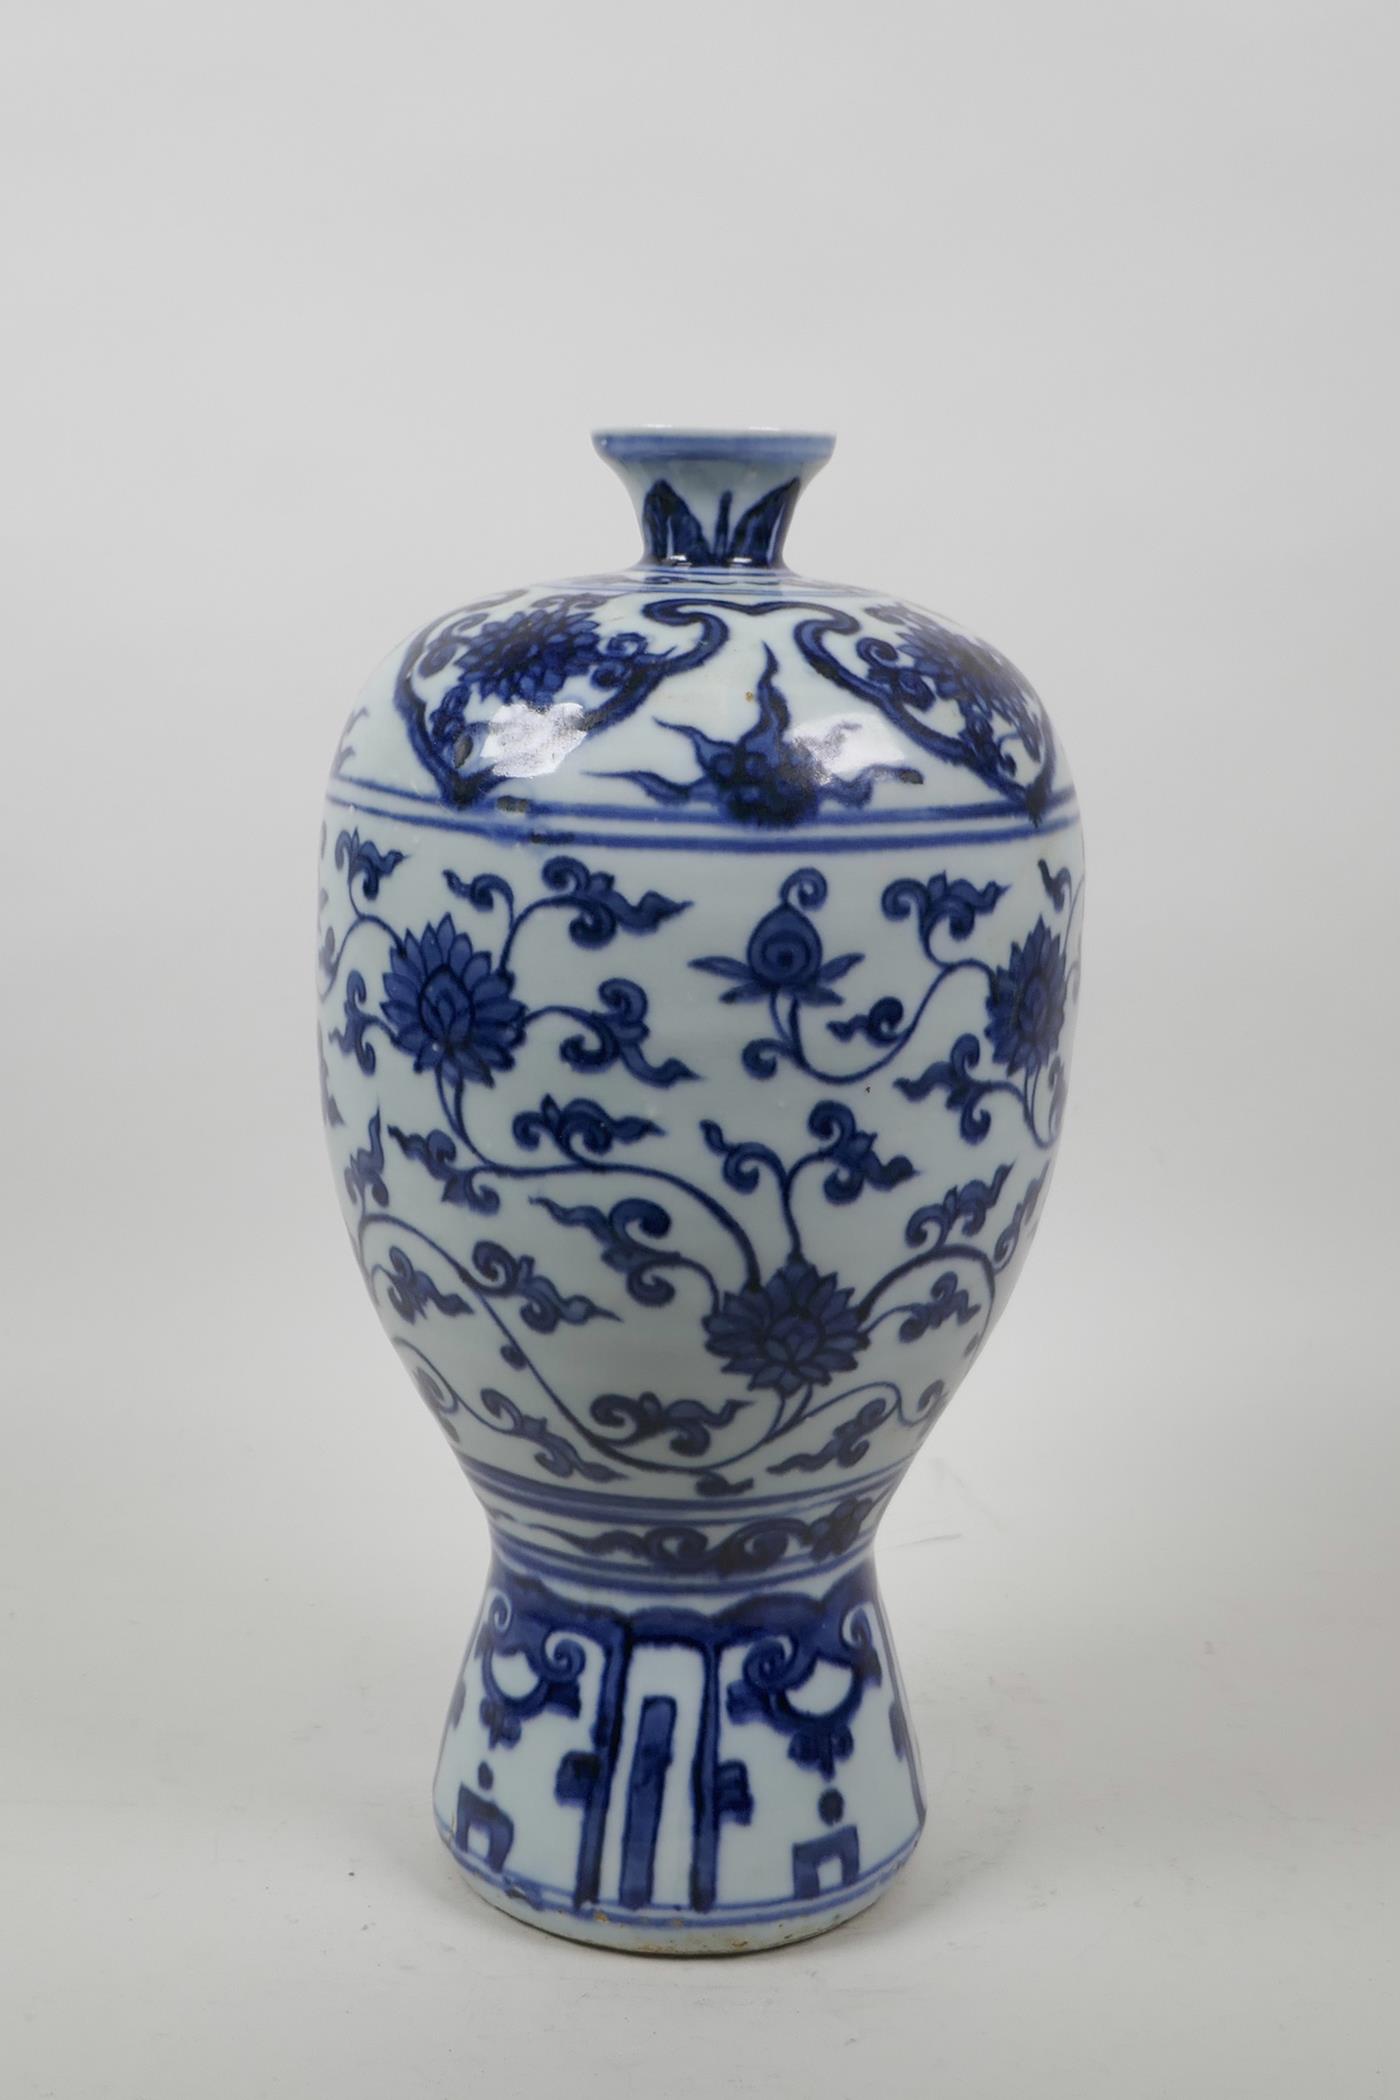 A Chinese blue and white Ming style vase with scrolling lotus flower decoration, 11½" high - Image 2 of 4